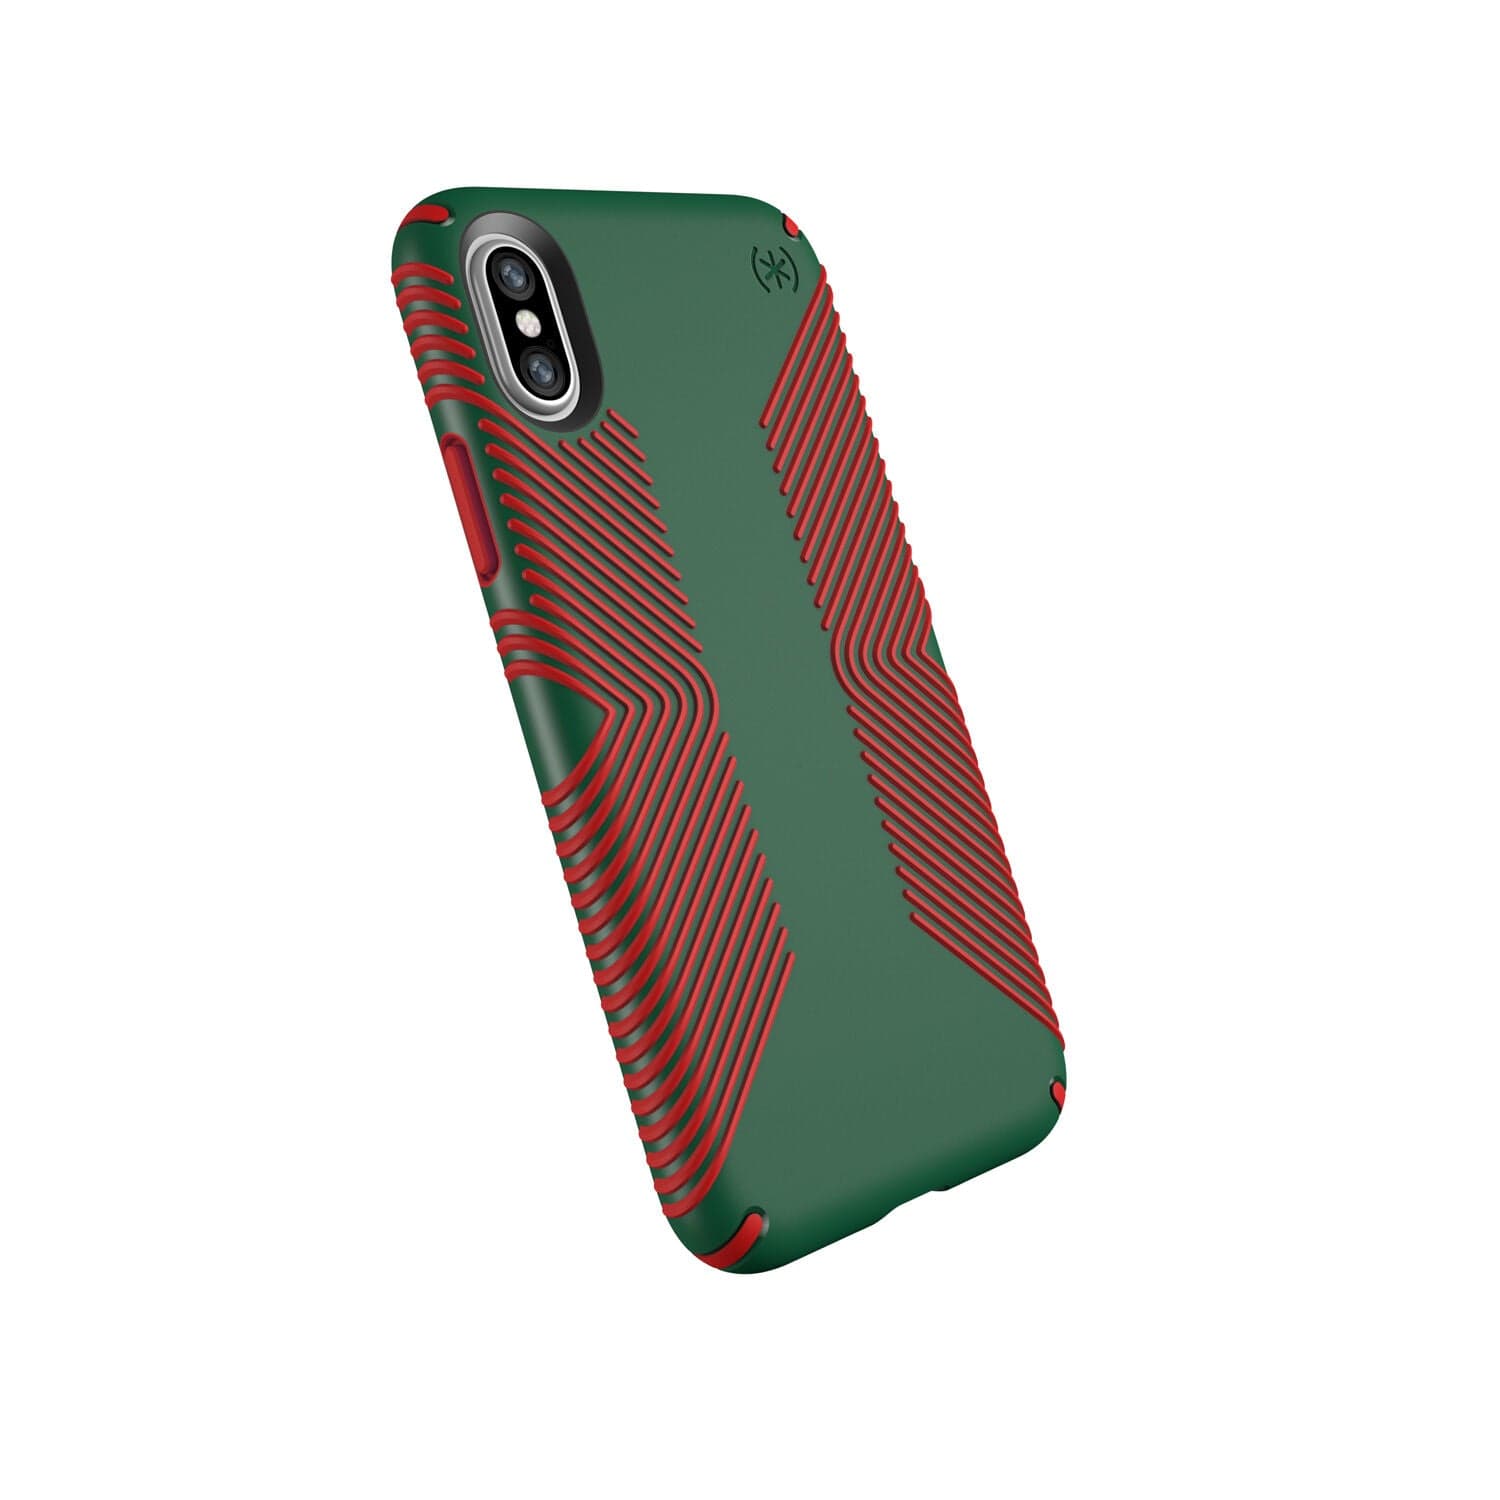 Presidio Grip Limited Edition iPhone XS/X Cases